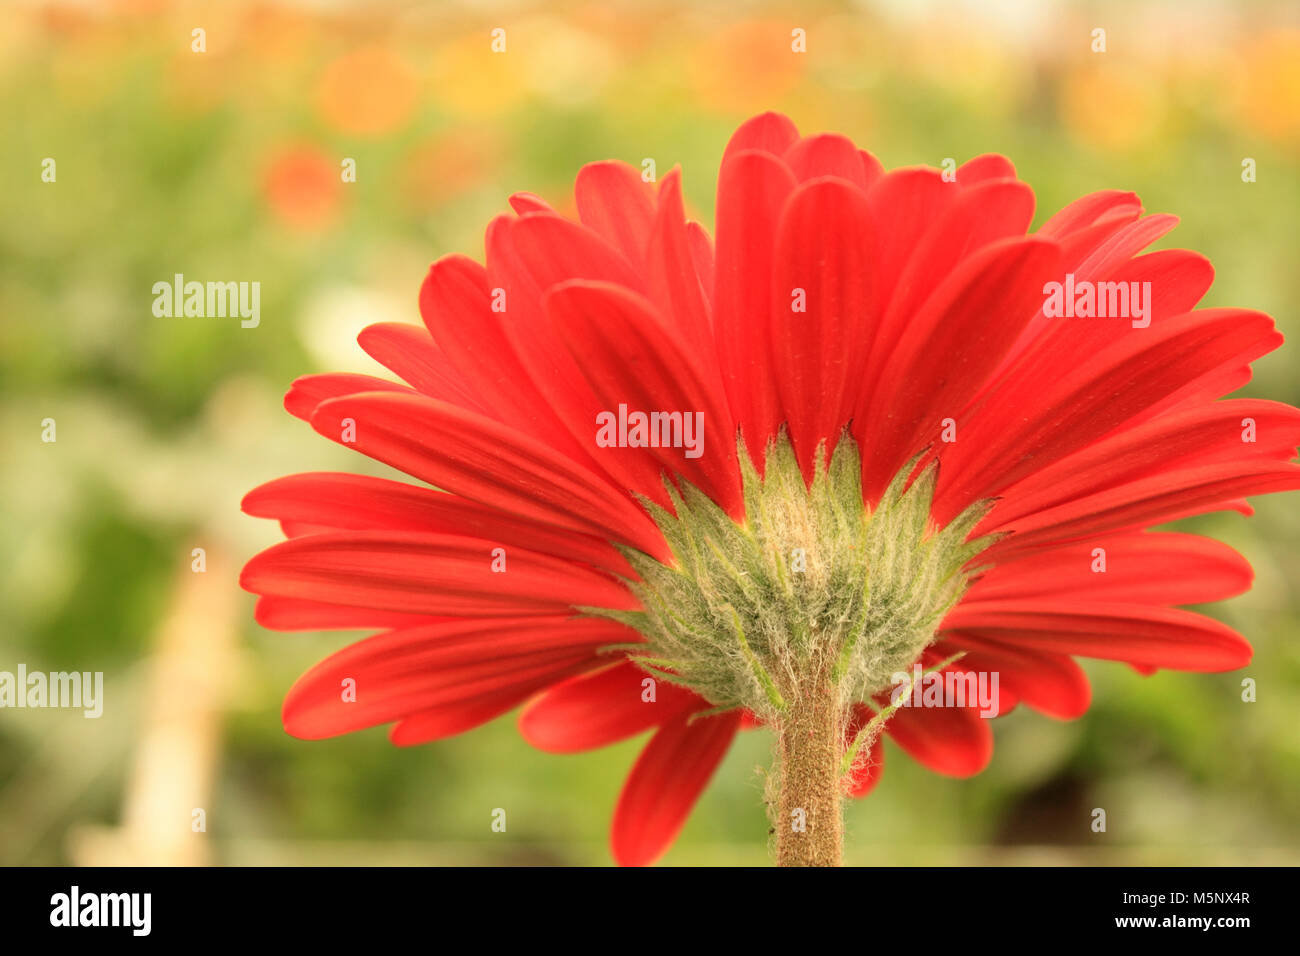 agriculture,background,beautiful,beauty,bloom,blossom,botany,bright,closeup,color,colorful,cut flower,daisy flower,daisy isolated,flora,floral,flower, Stock Photo